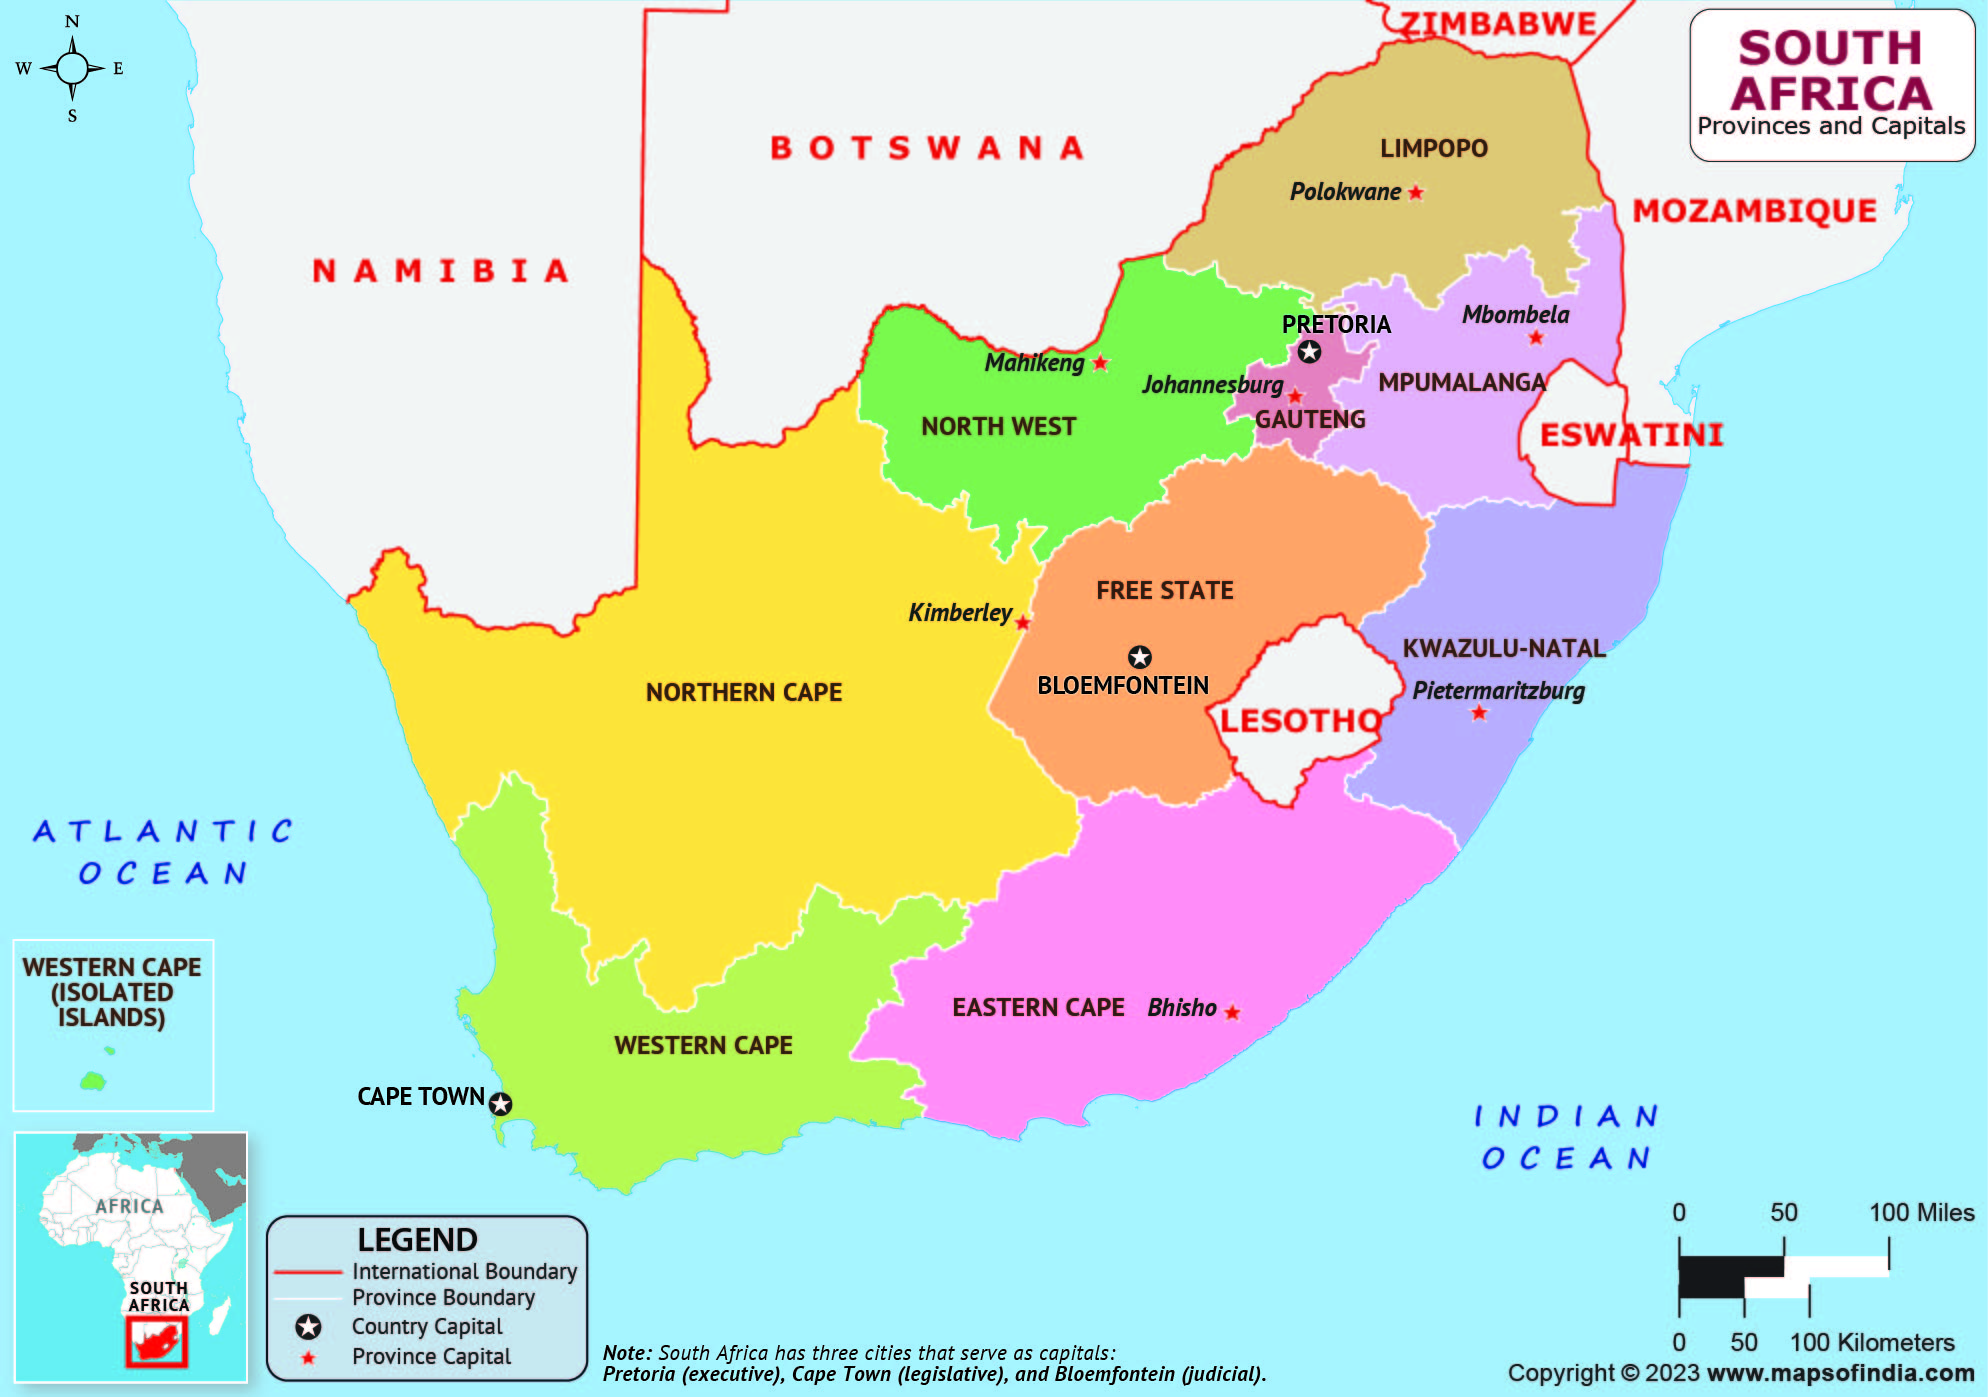 South Africa Provinces And Capitals List And Map List Of Provinces